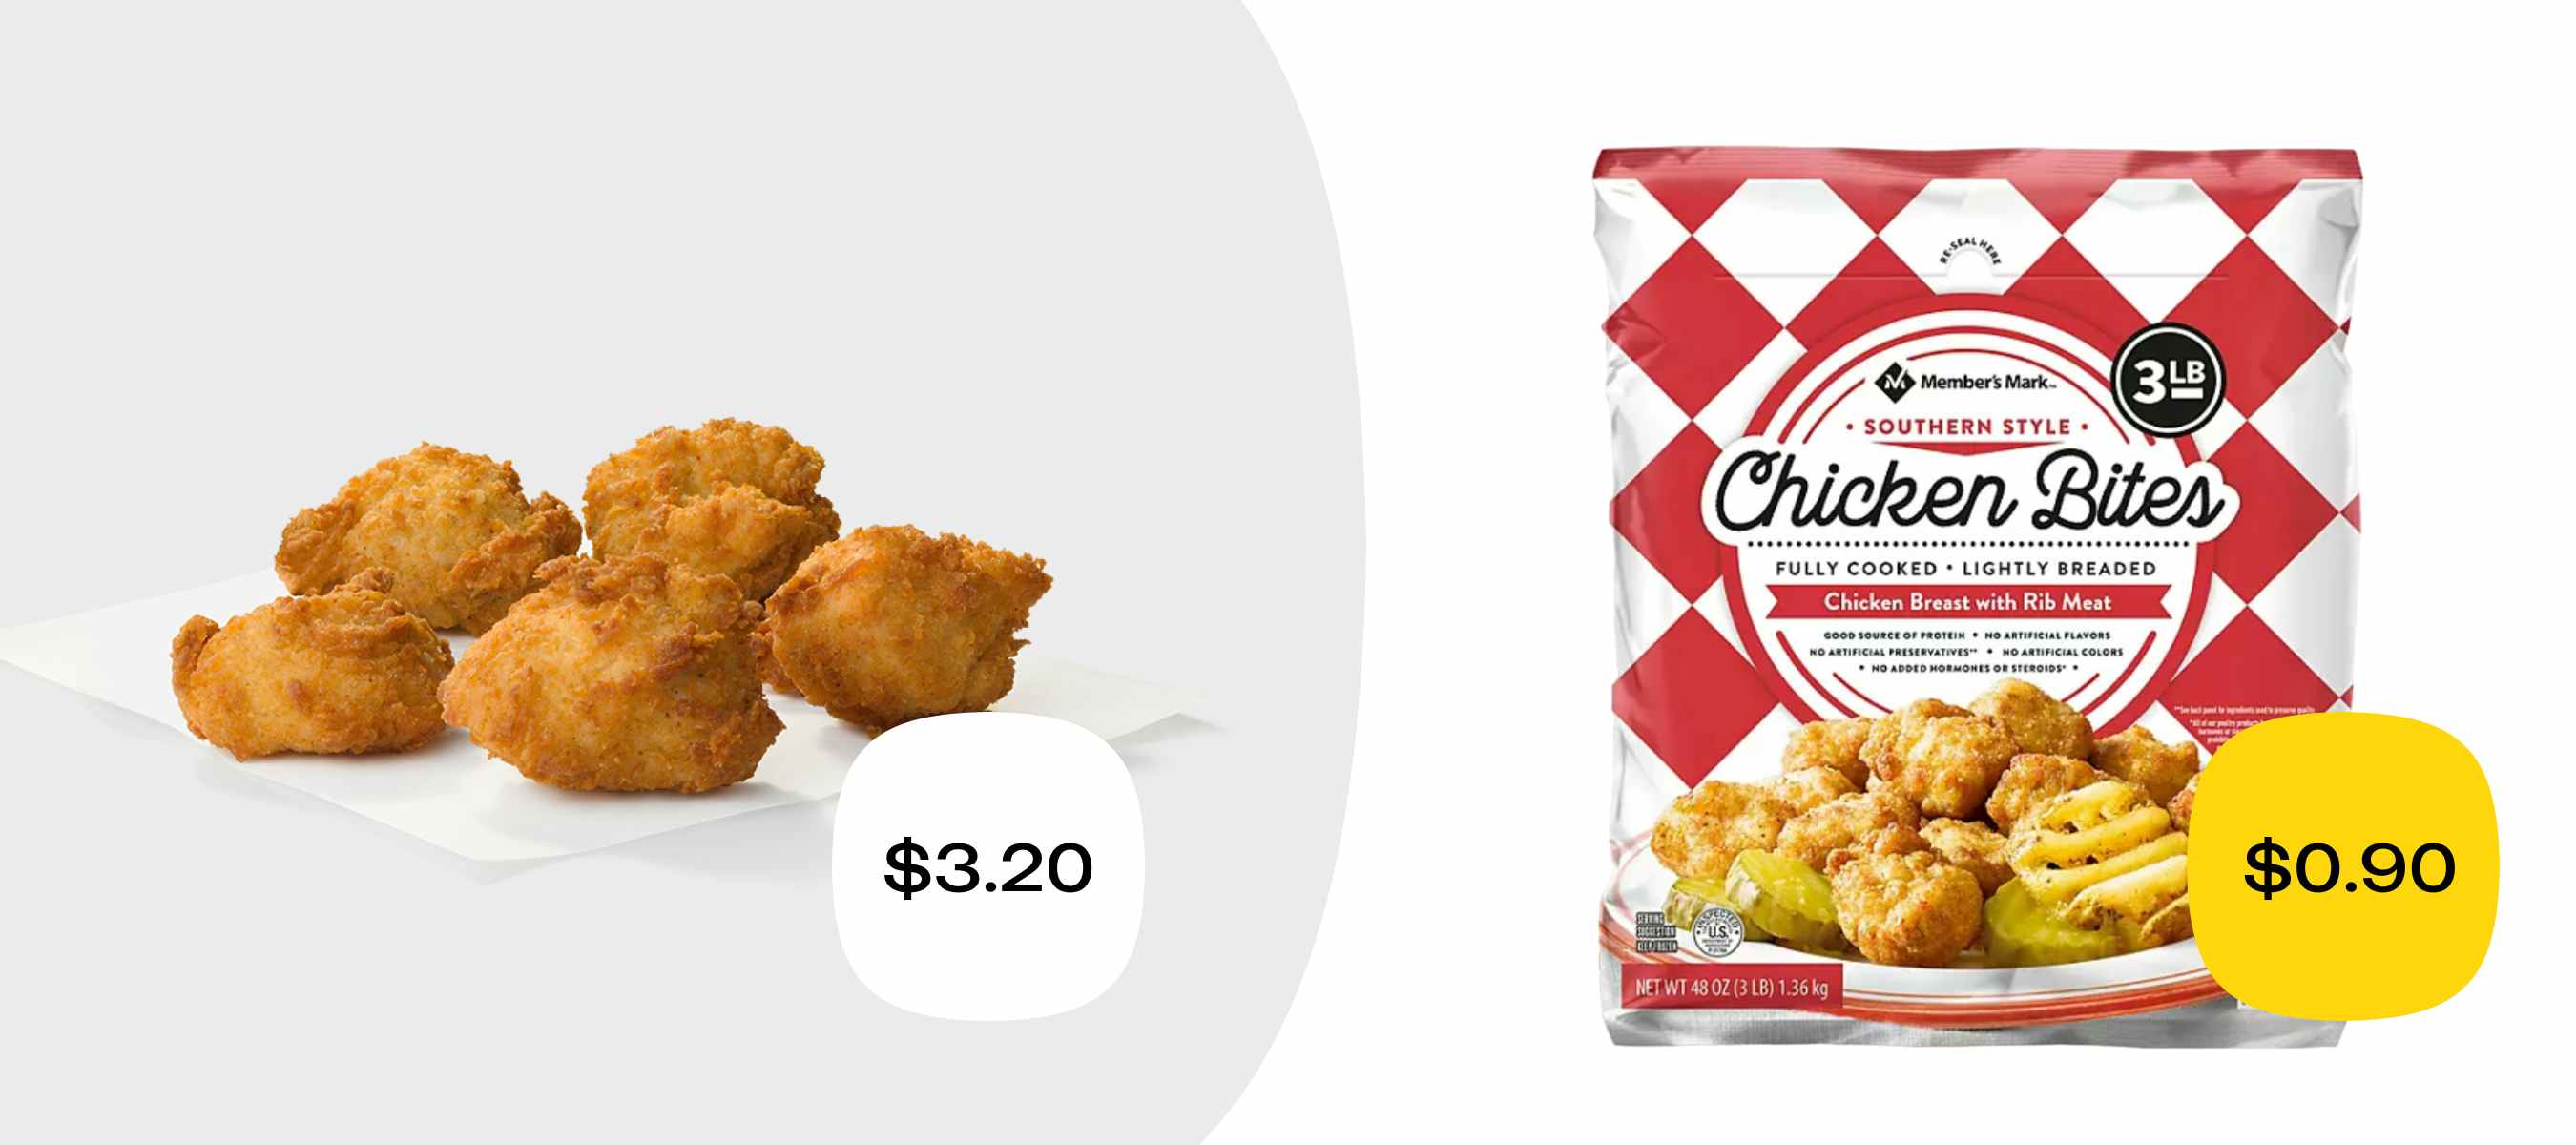 chick fil a chicken nuggets for $3.20 versus a similar amount of member's mark nuggets for $0.90